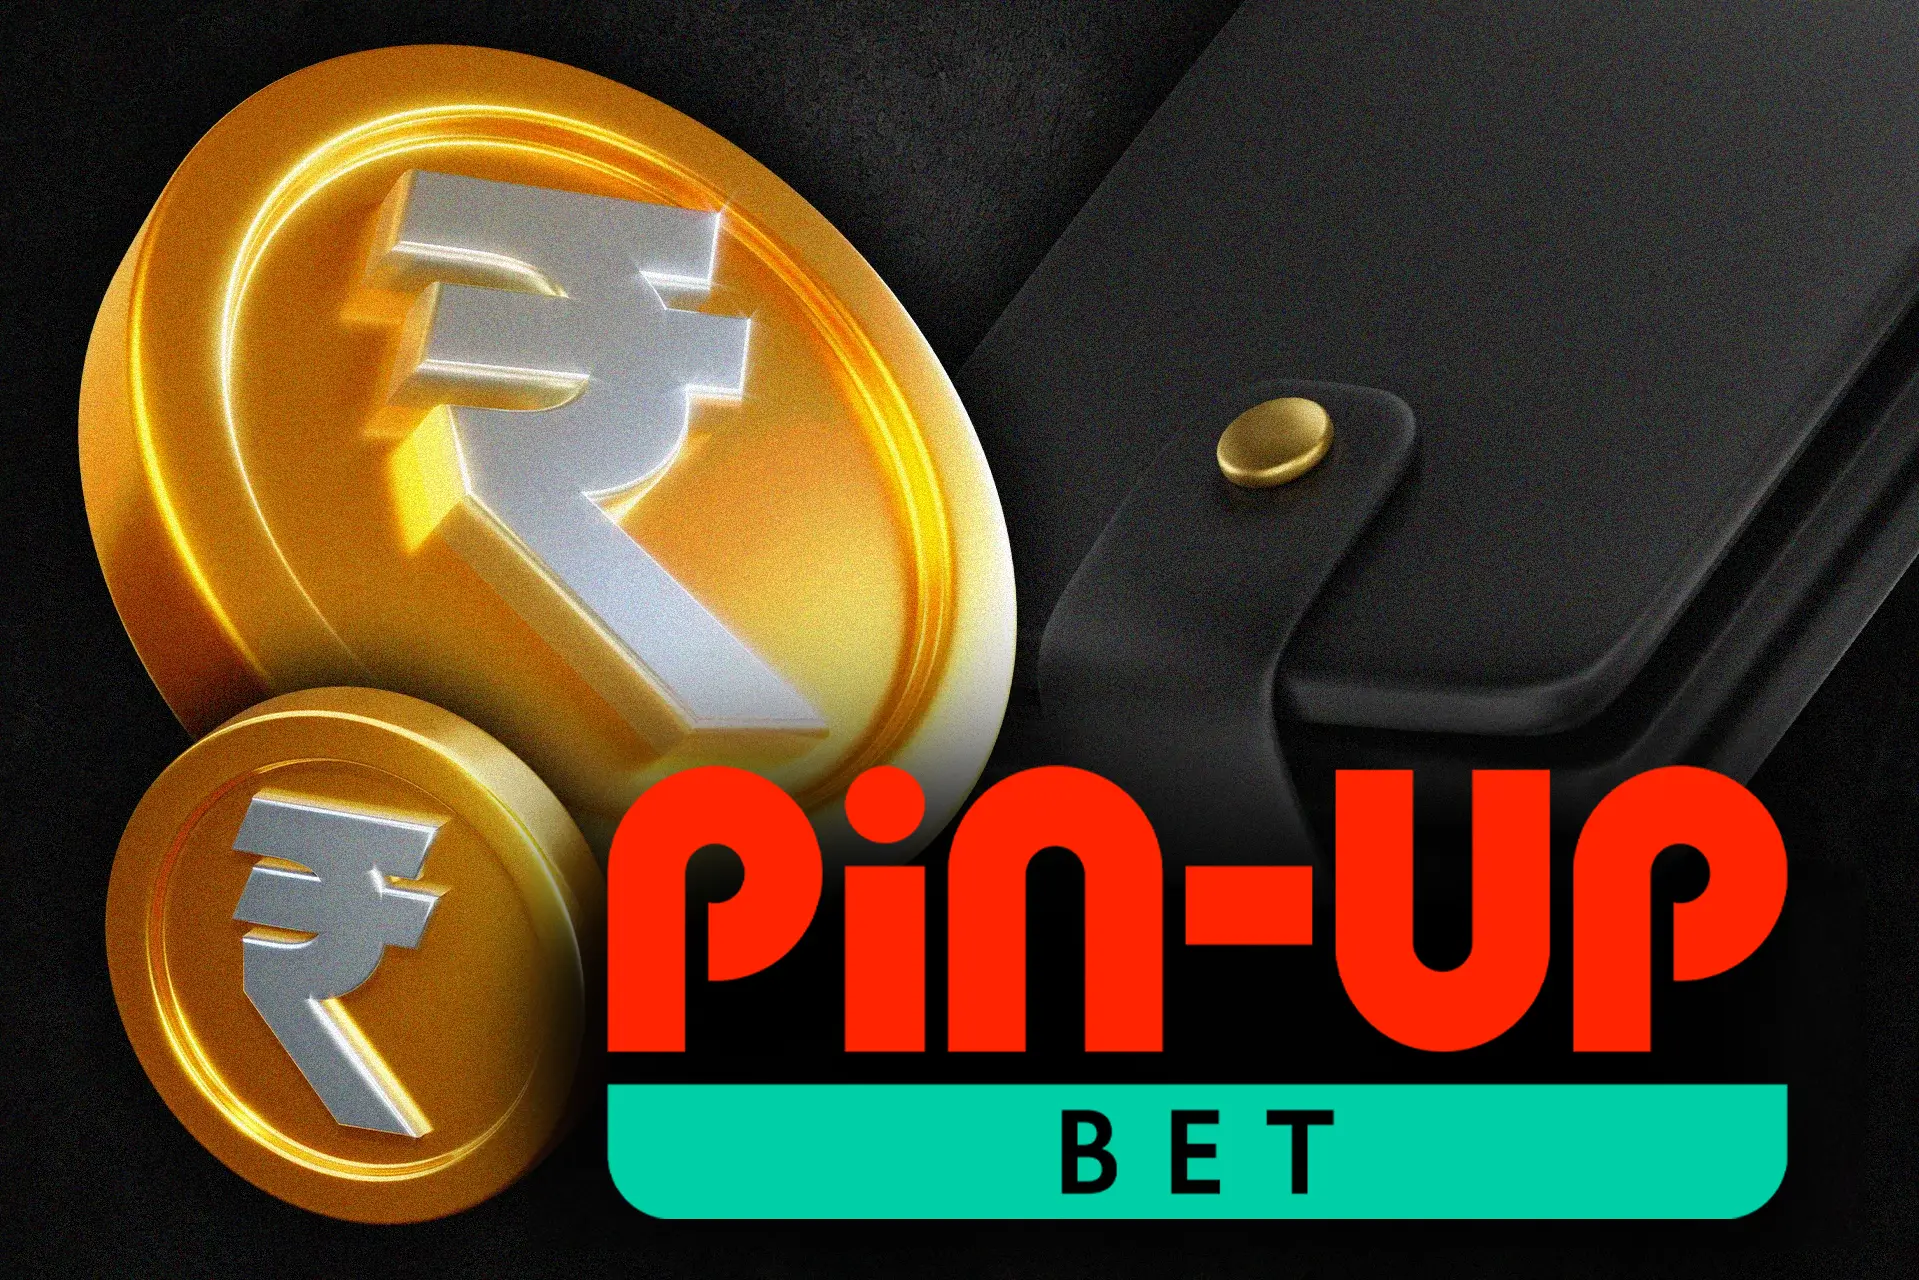 You can esuly and quickly deposit and withdraw money at Pin Up.